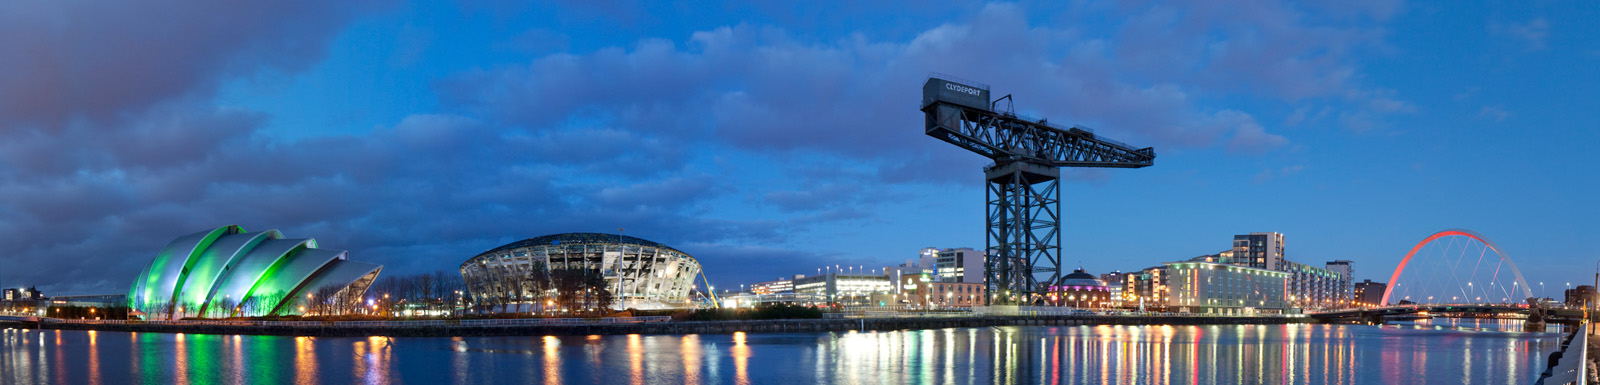 The Hydro will be a major Glasgow project to complete in 2013